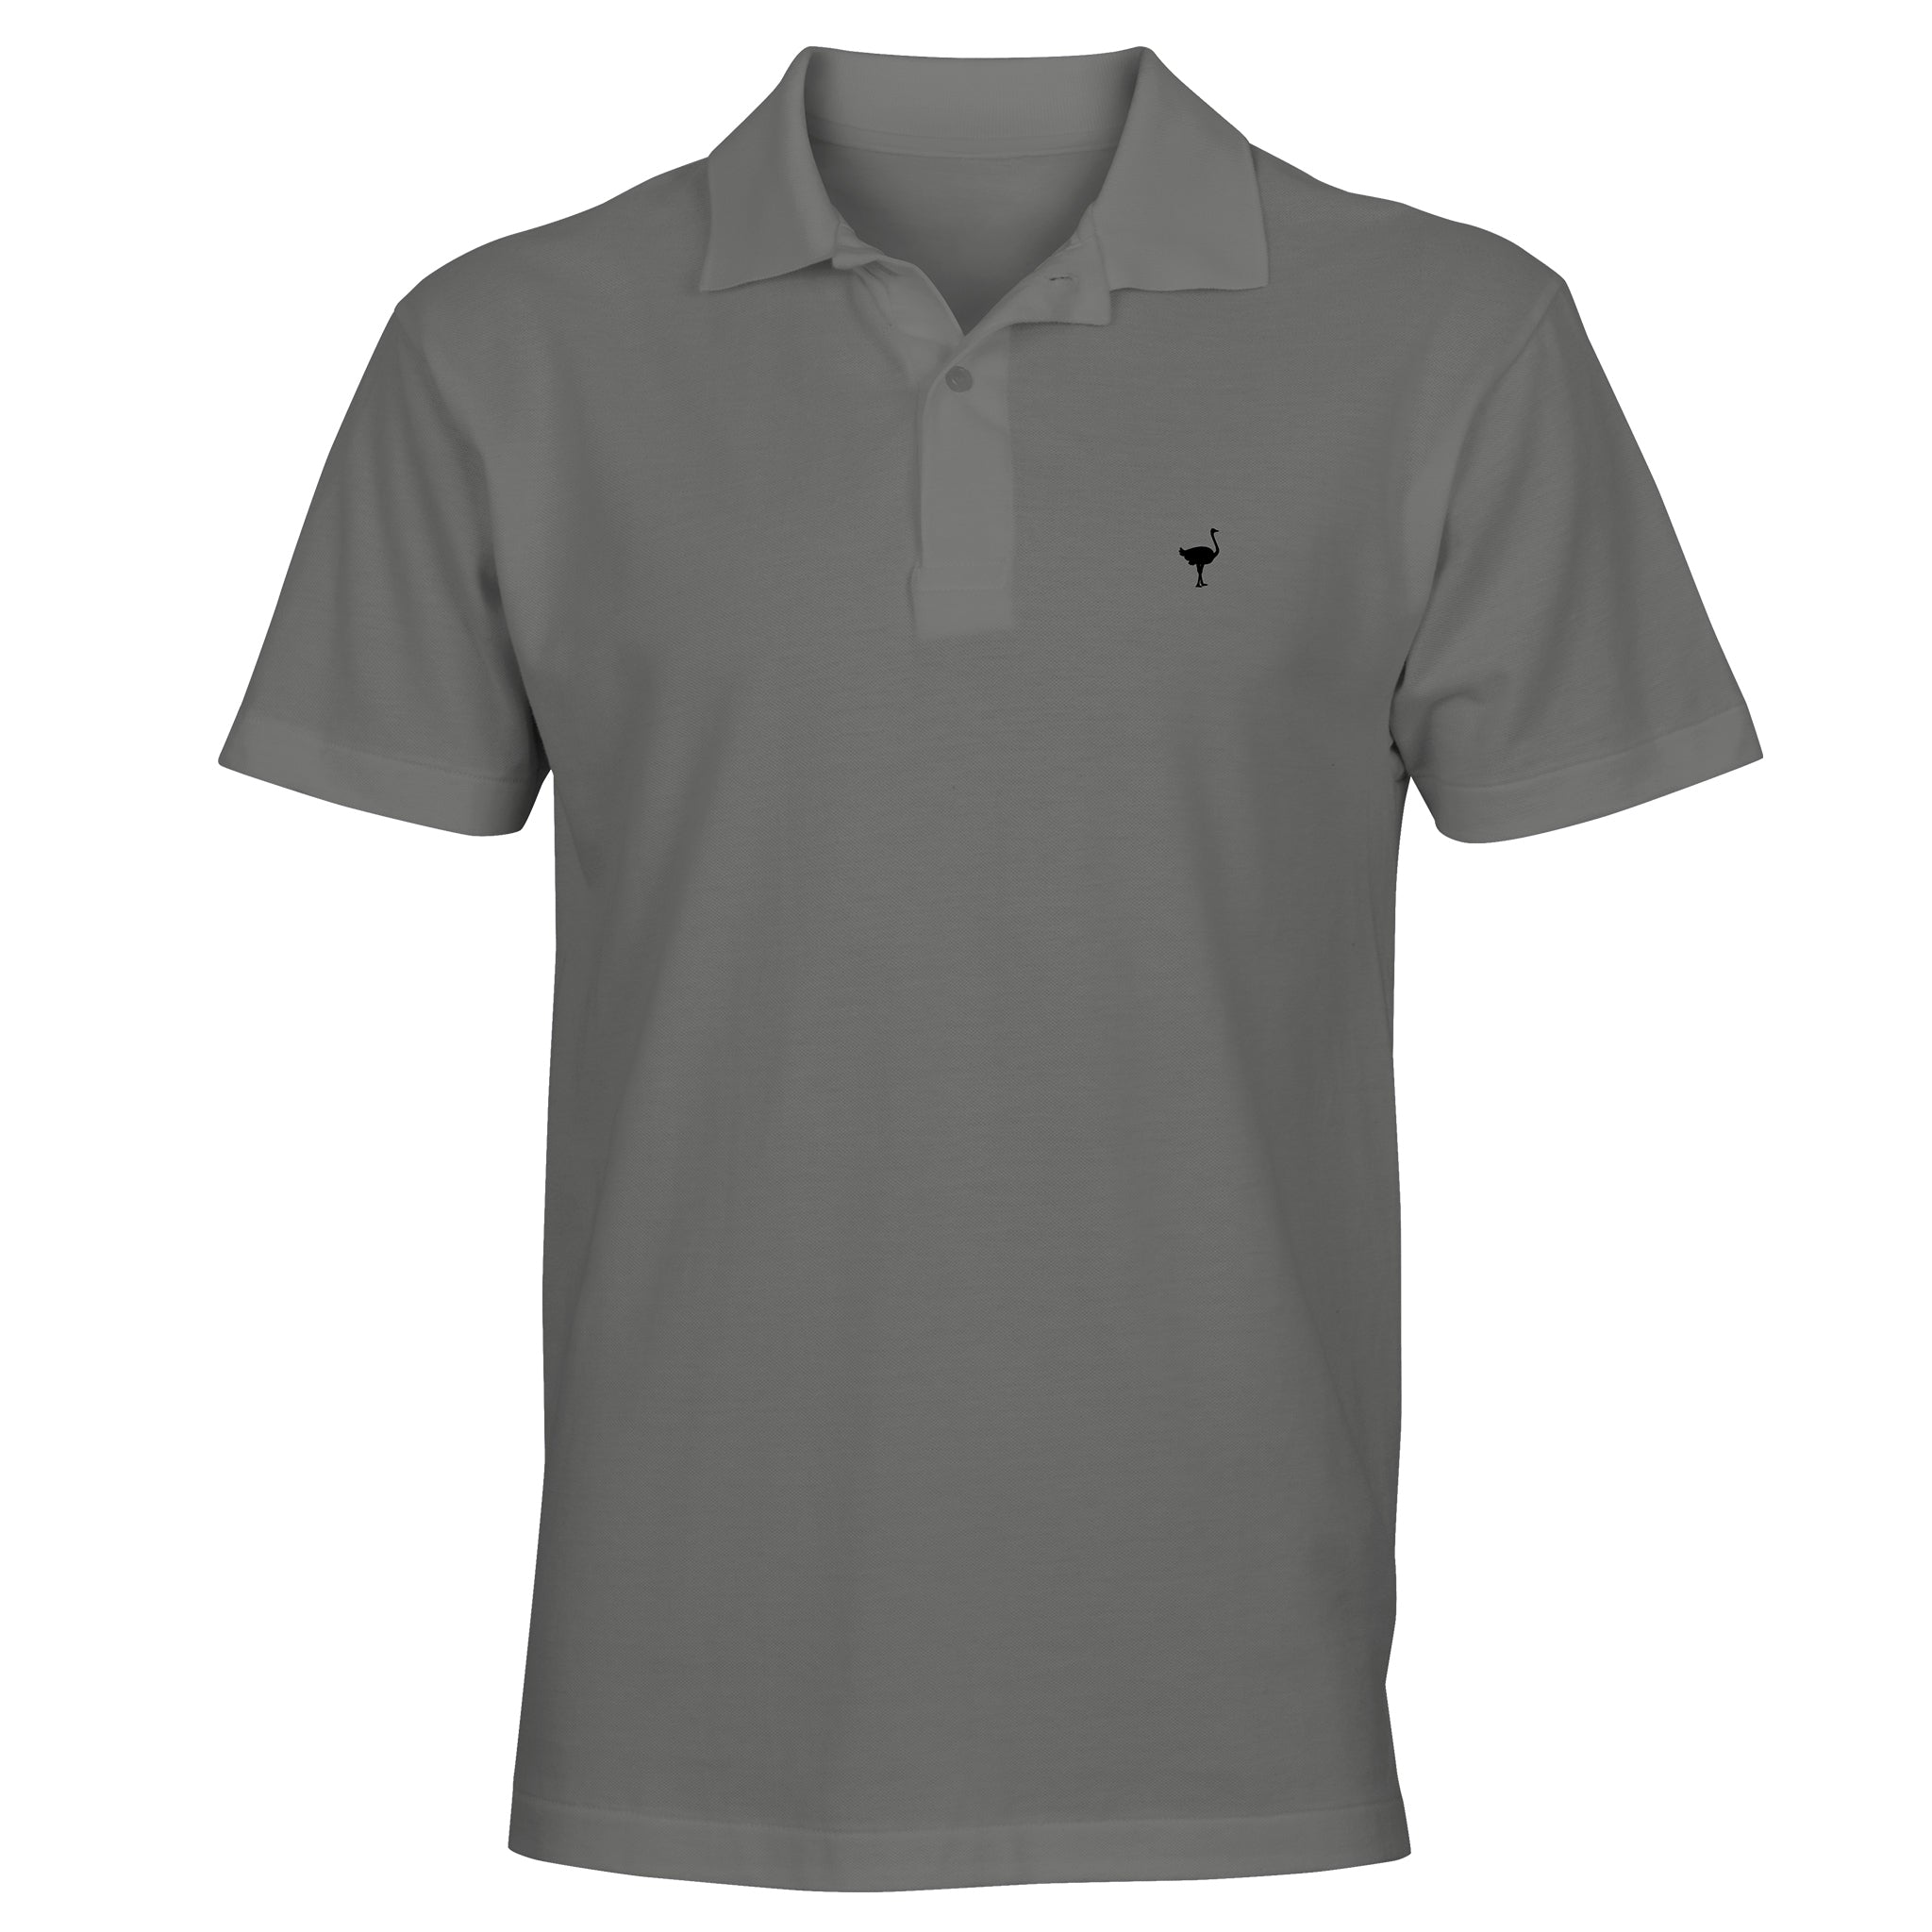 The Classy Chiver V2 Polo – The Chivery